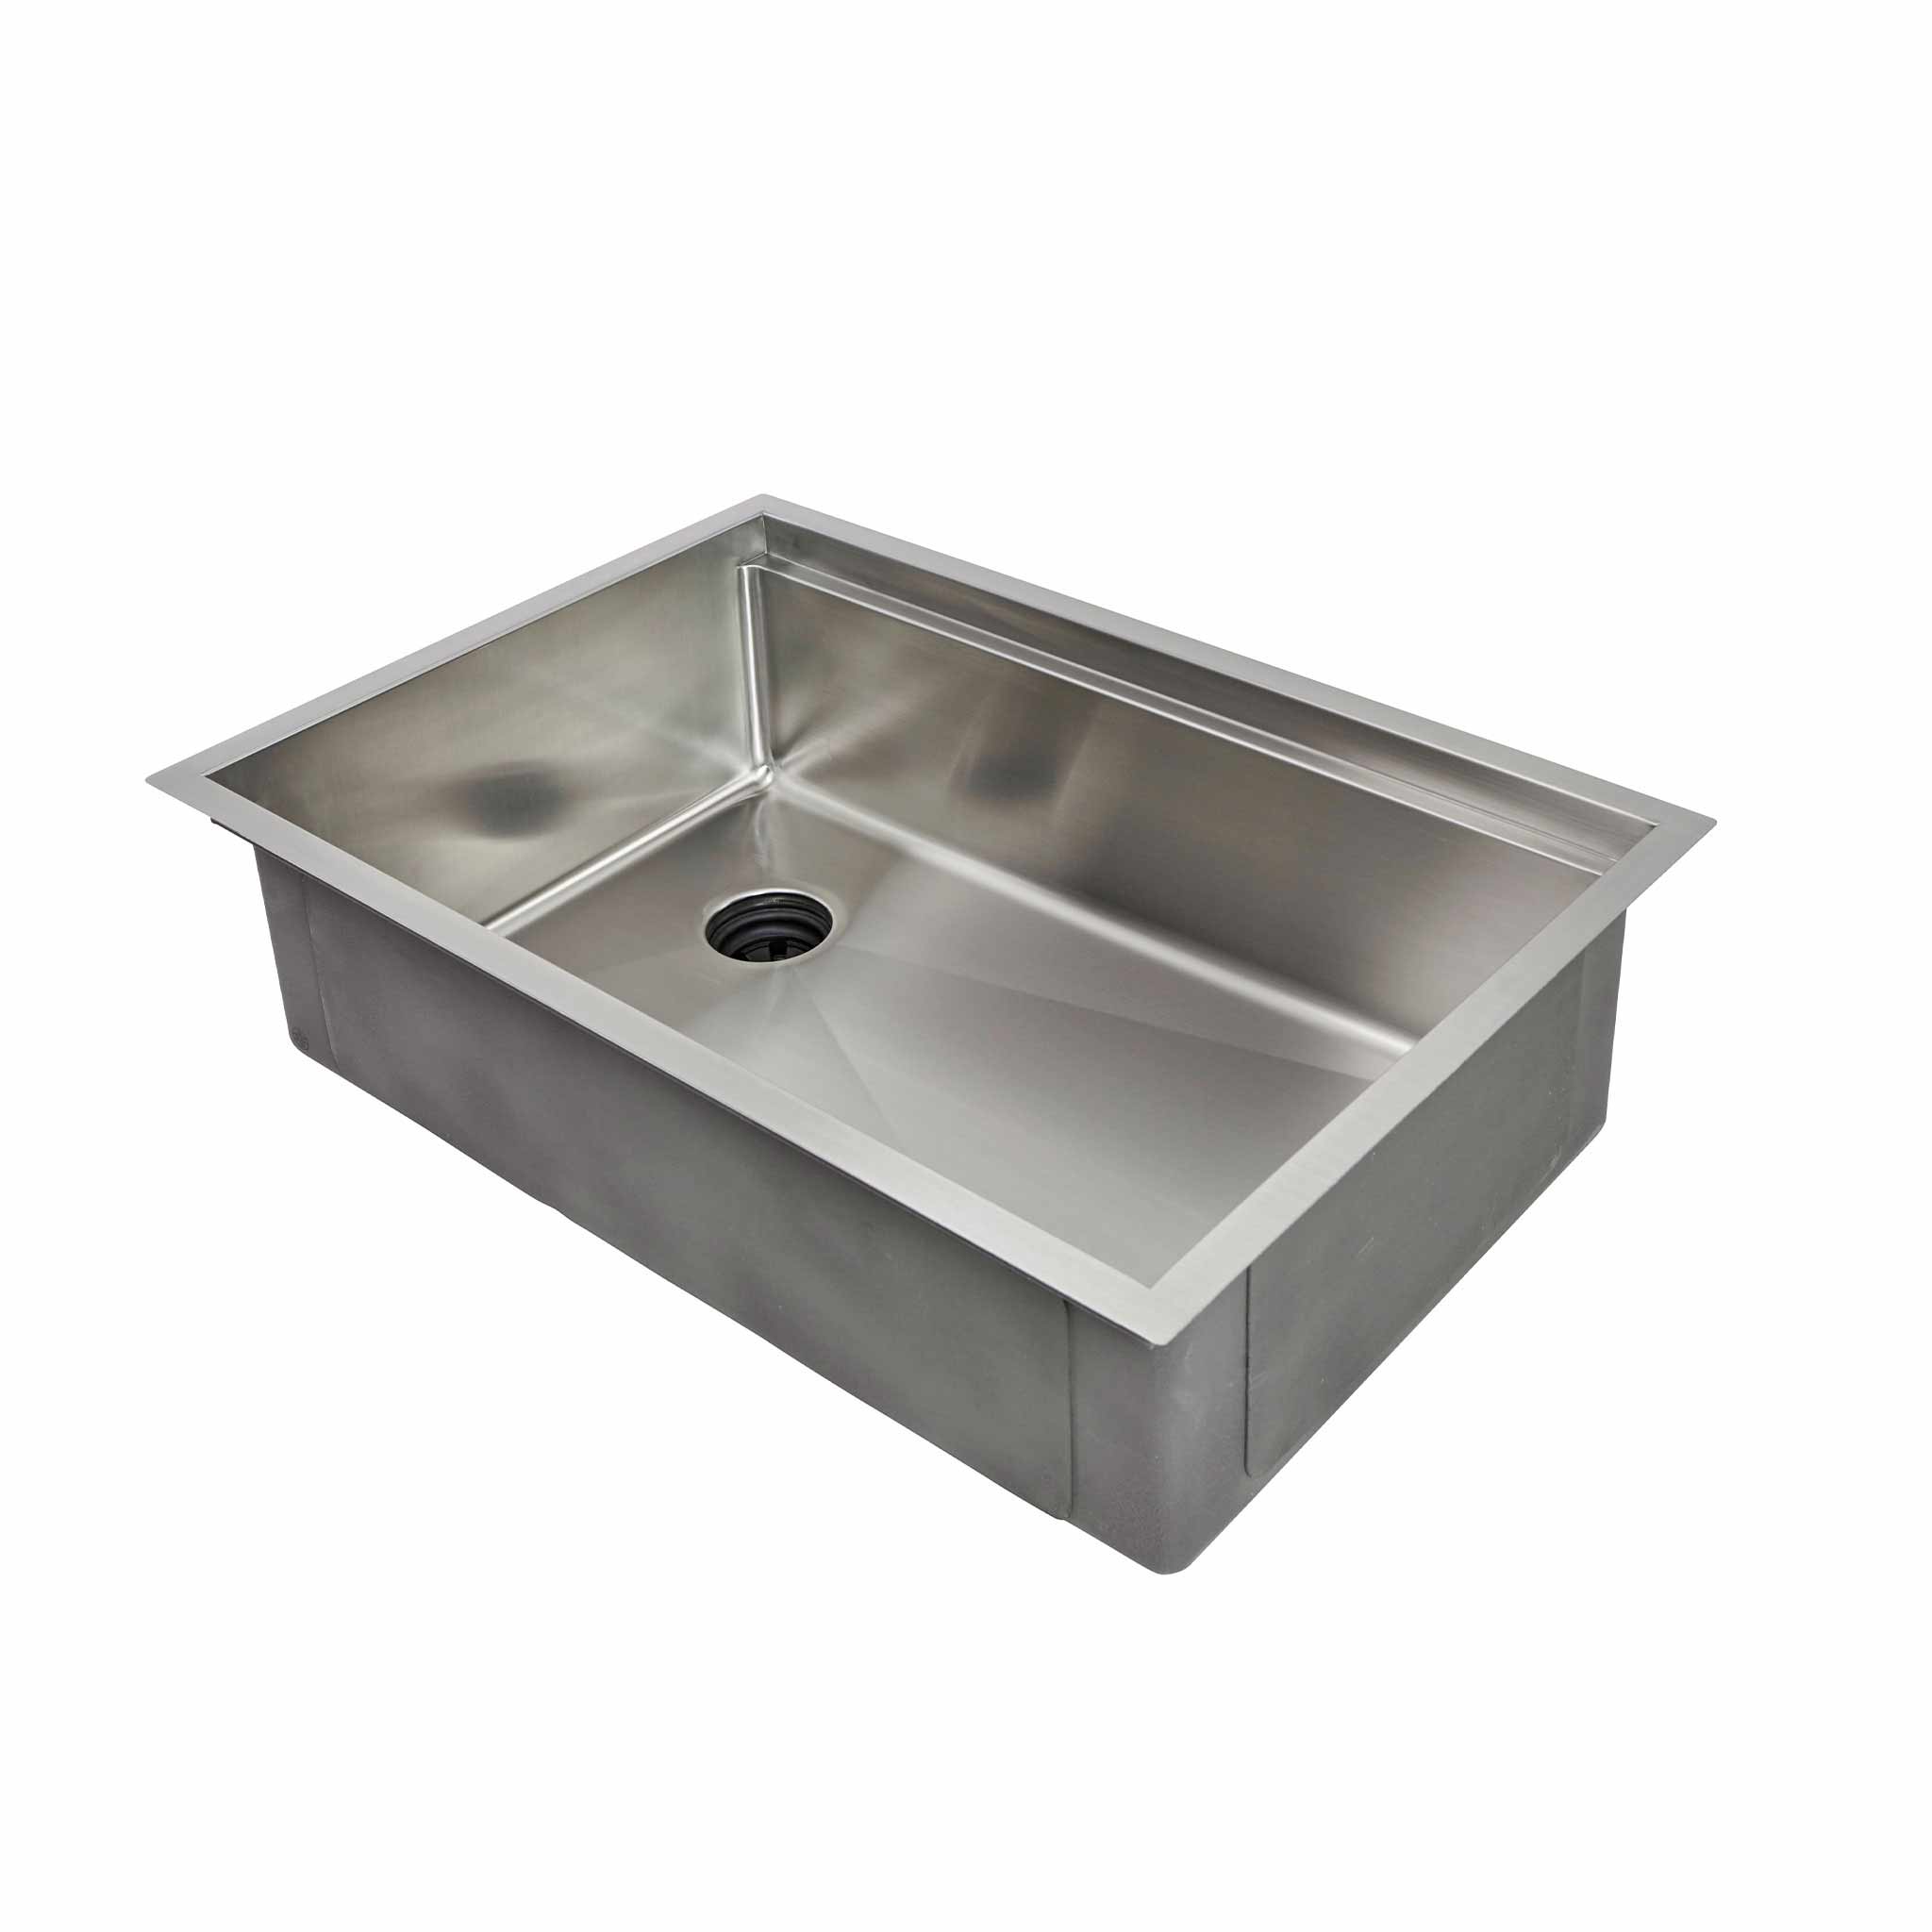 28 inch, workstation sink with offset drain to the left and an 8” depth and Create Good Sinks' patented seamless drain.